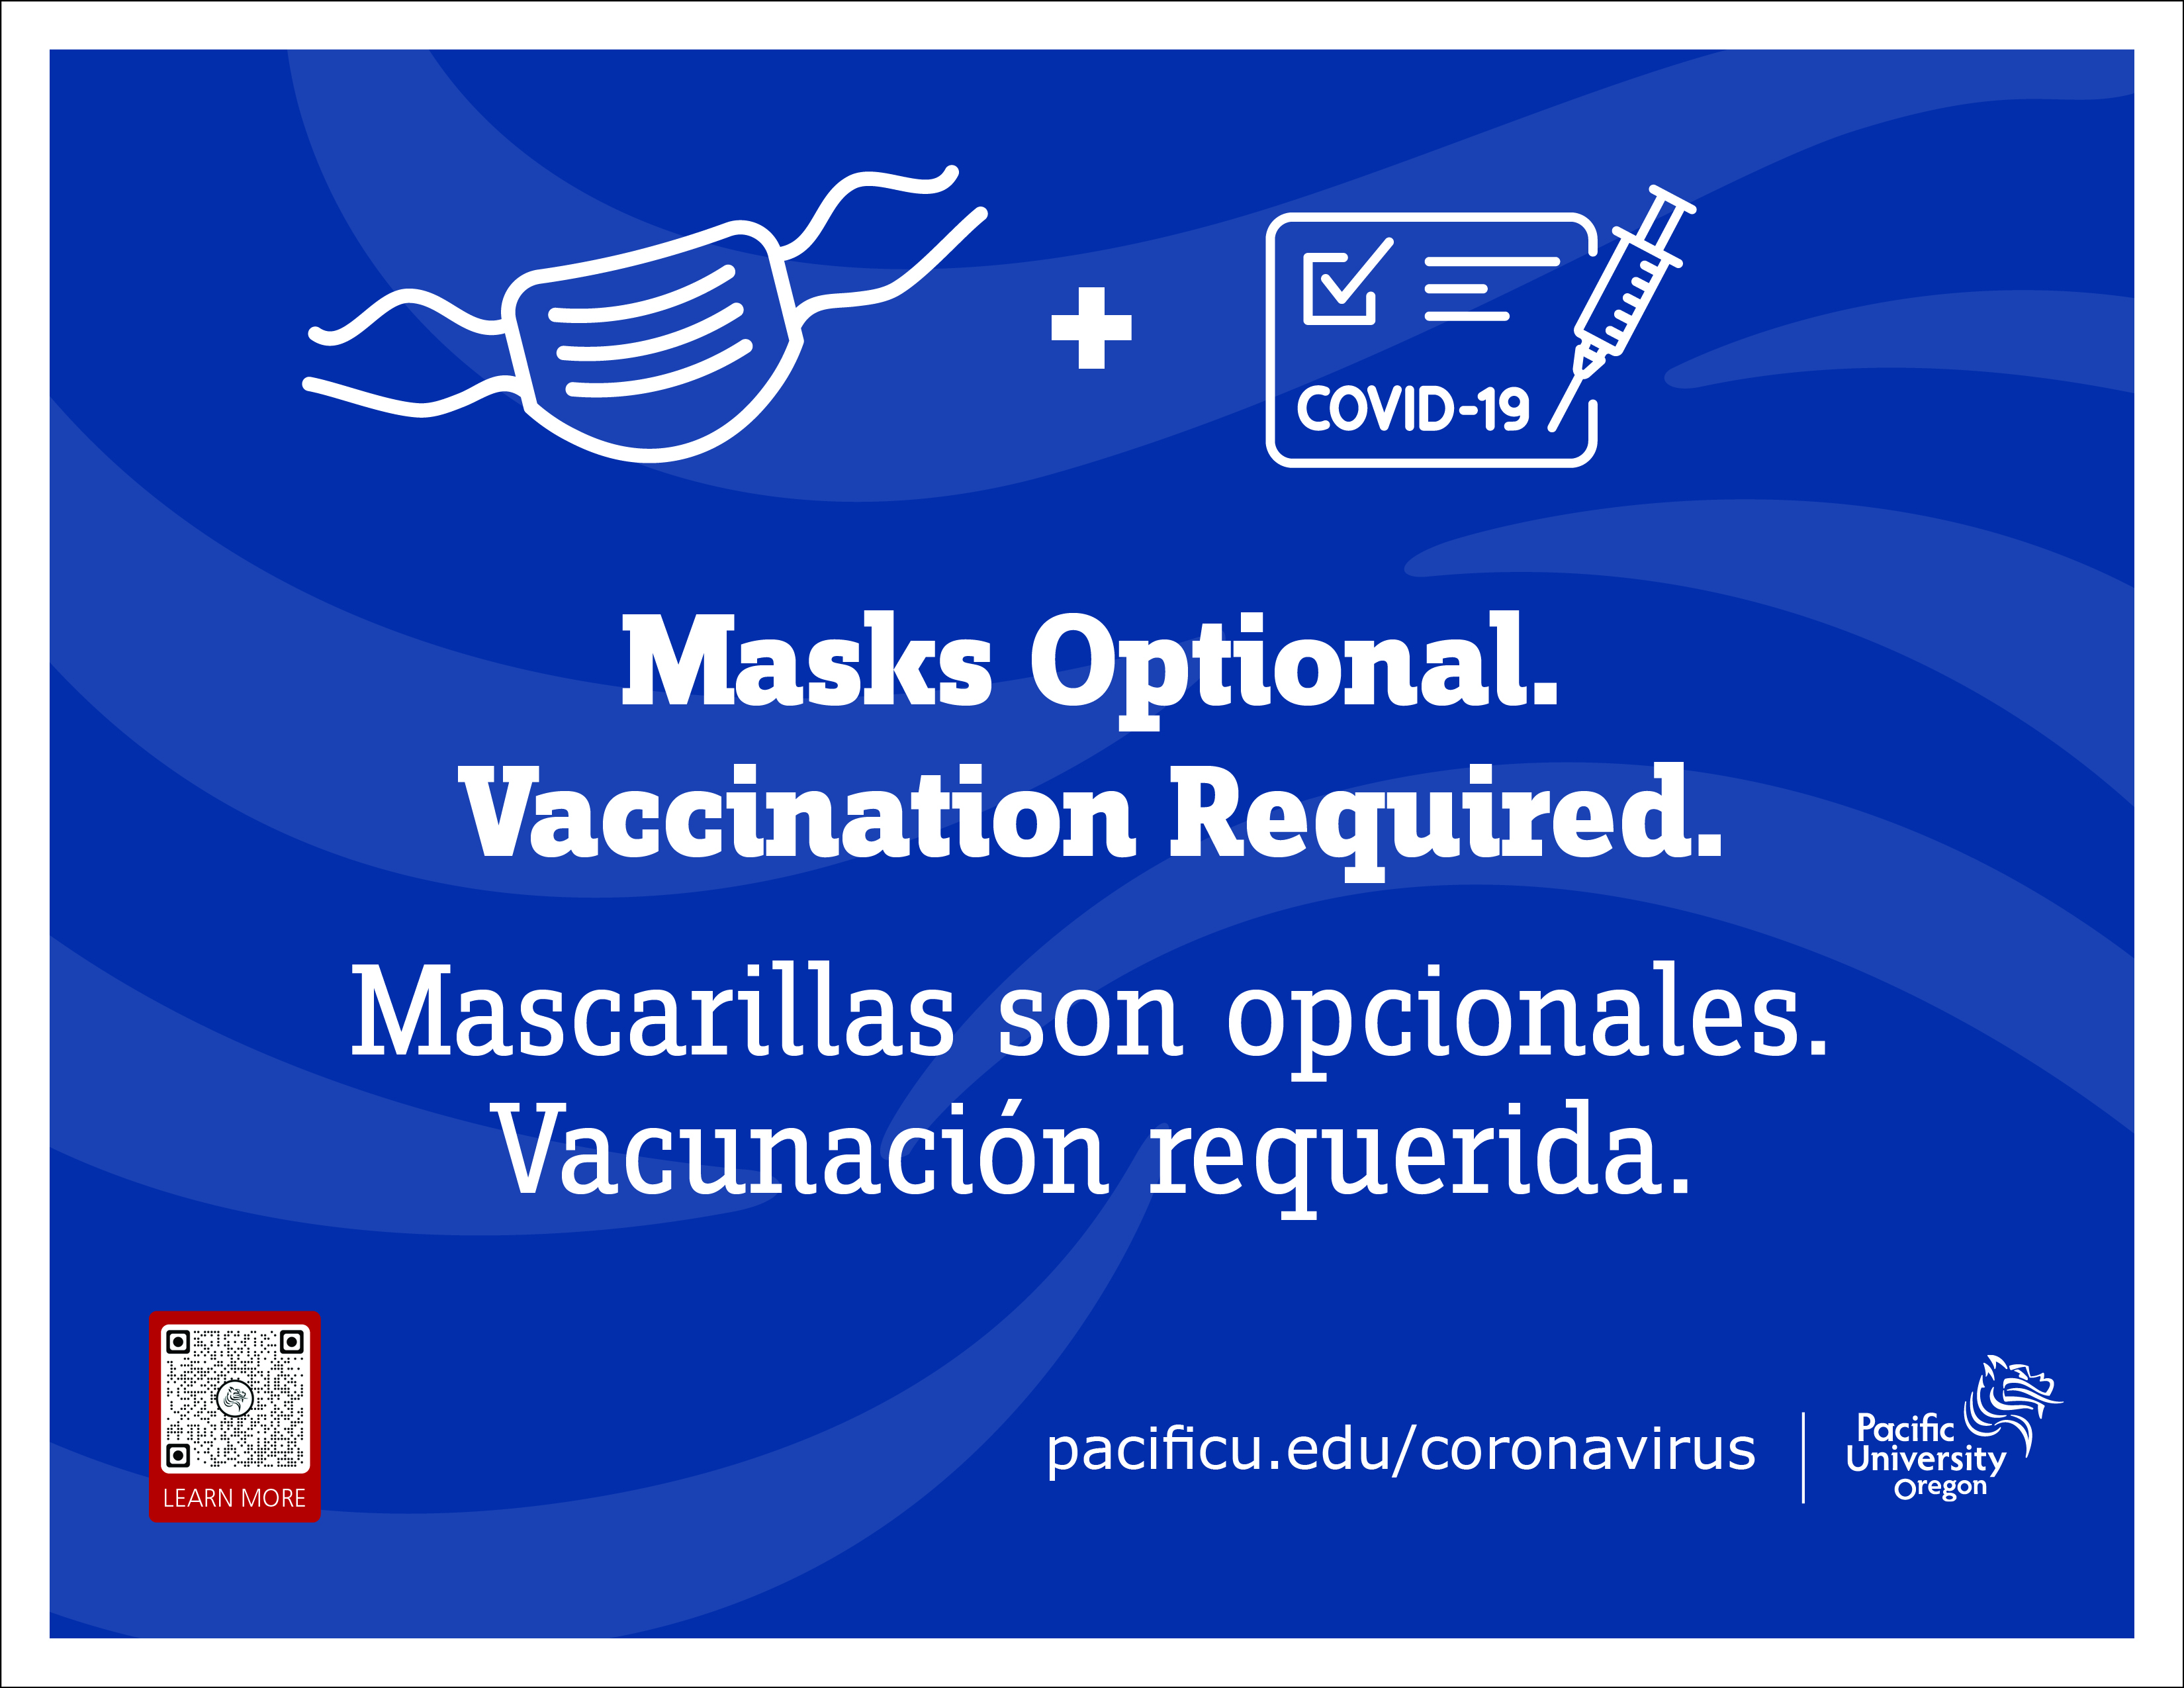 Masks Optional. Vaccination Required.